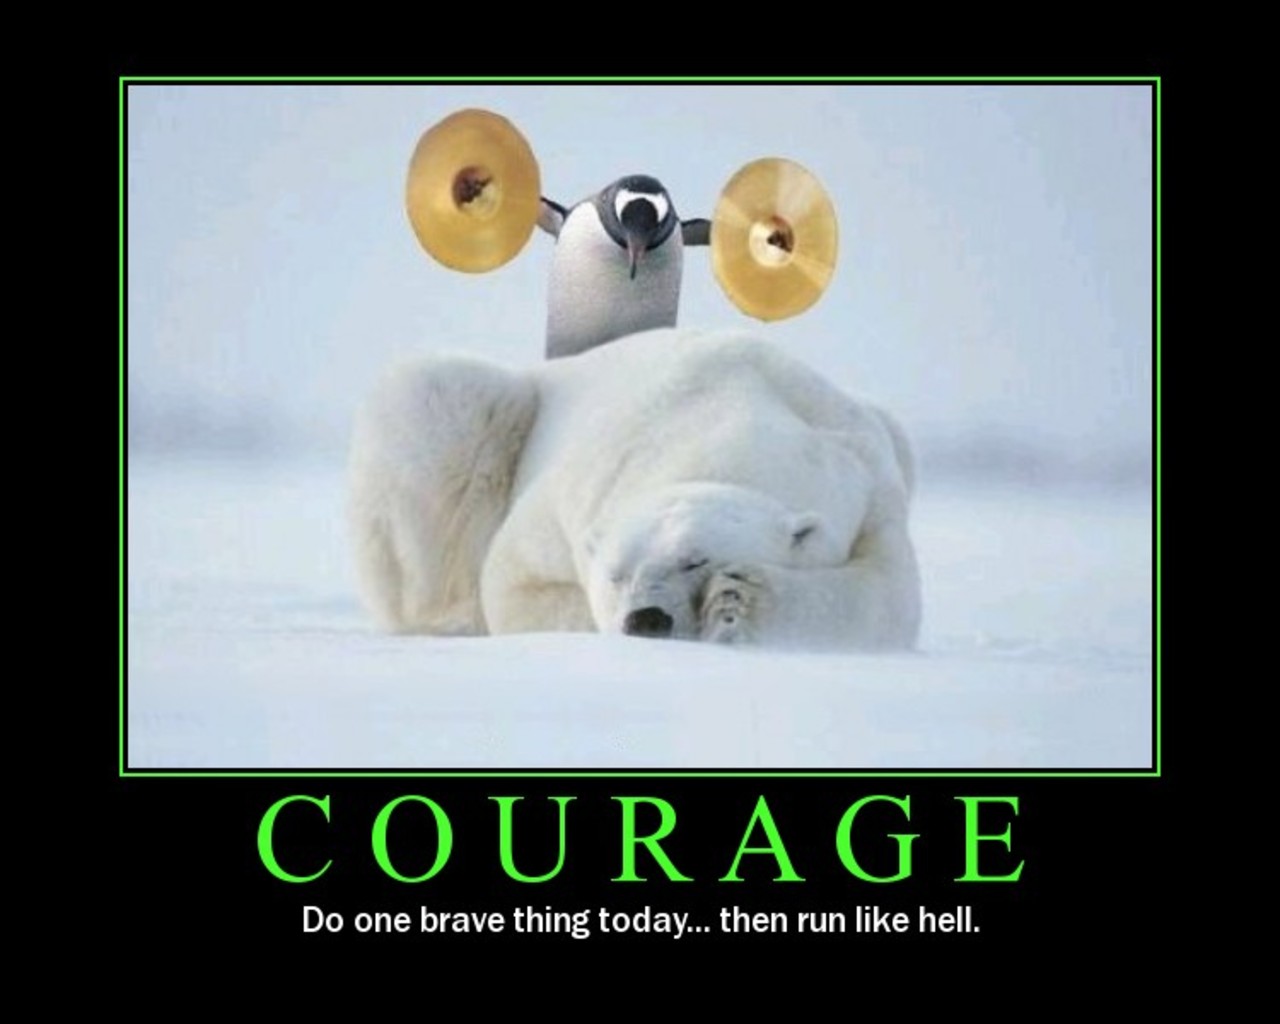 funny inspirational quotes - Courage Do one brave thing today... then run hell.